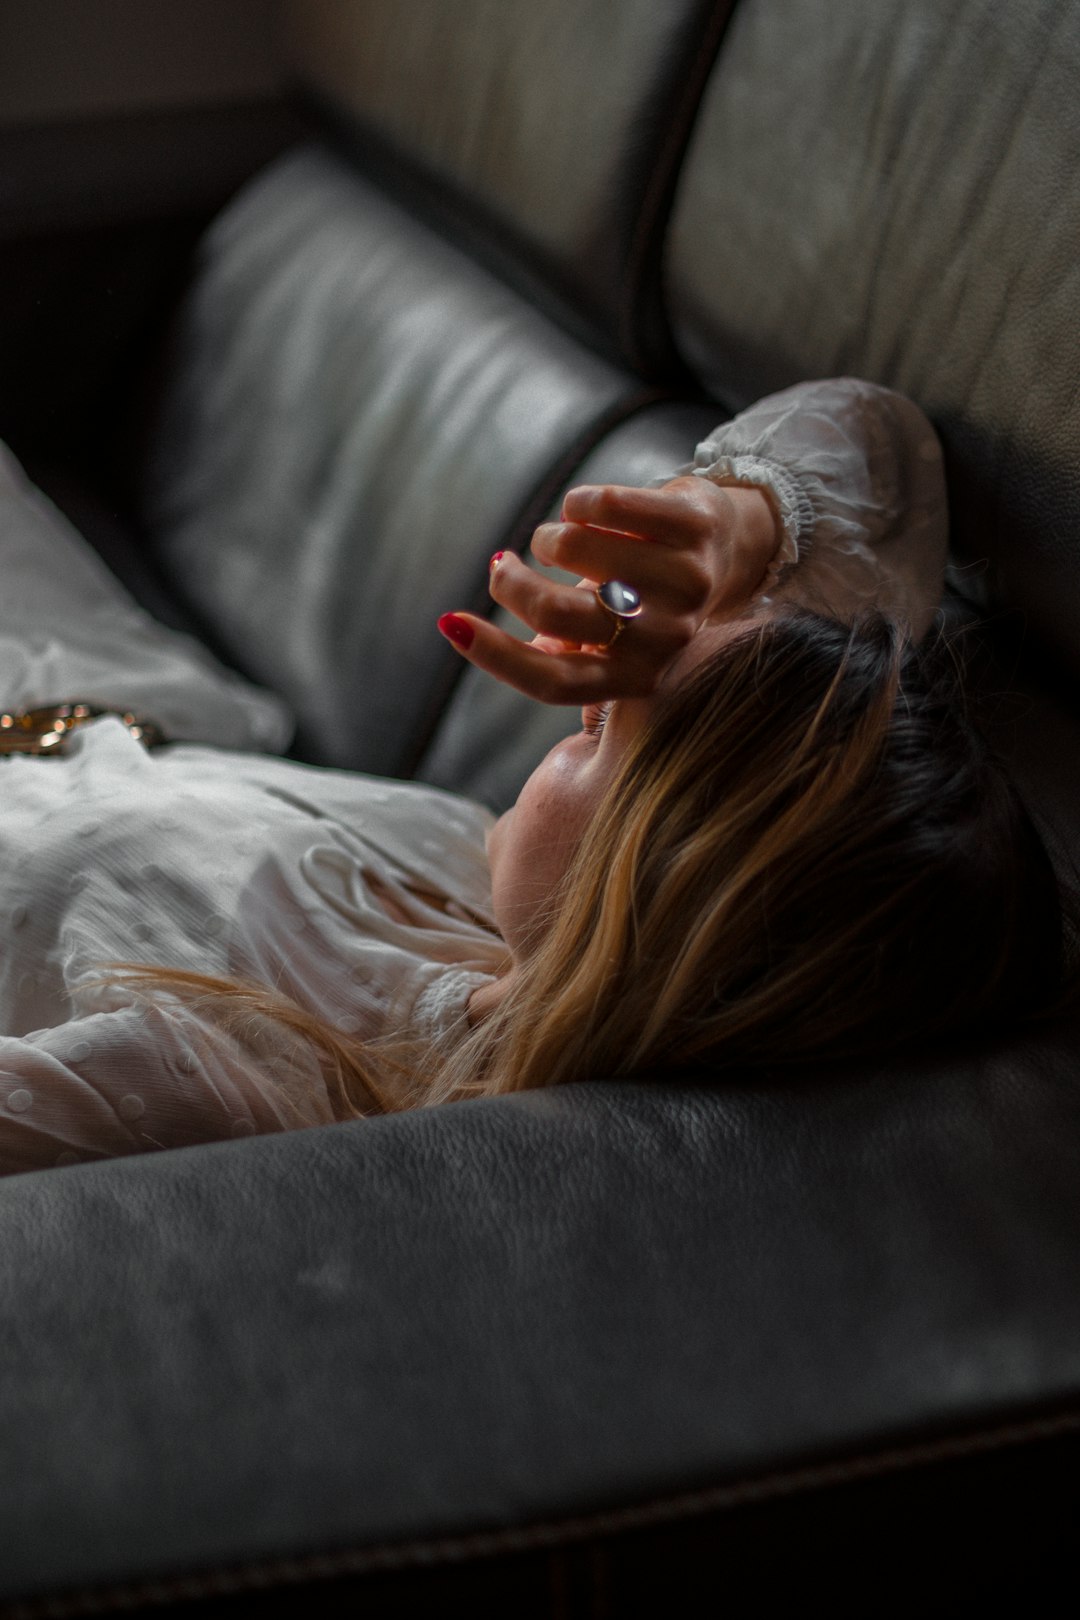 woman in white long sleeve shirt lying on black couch